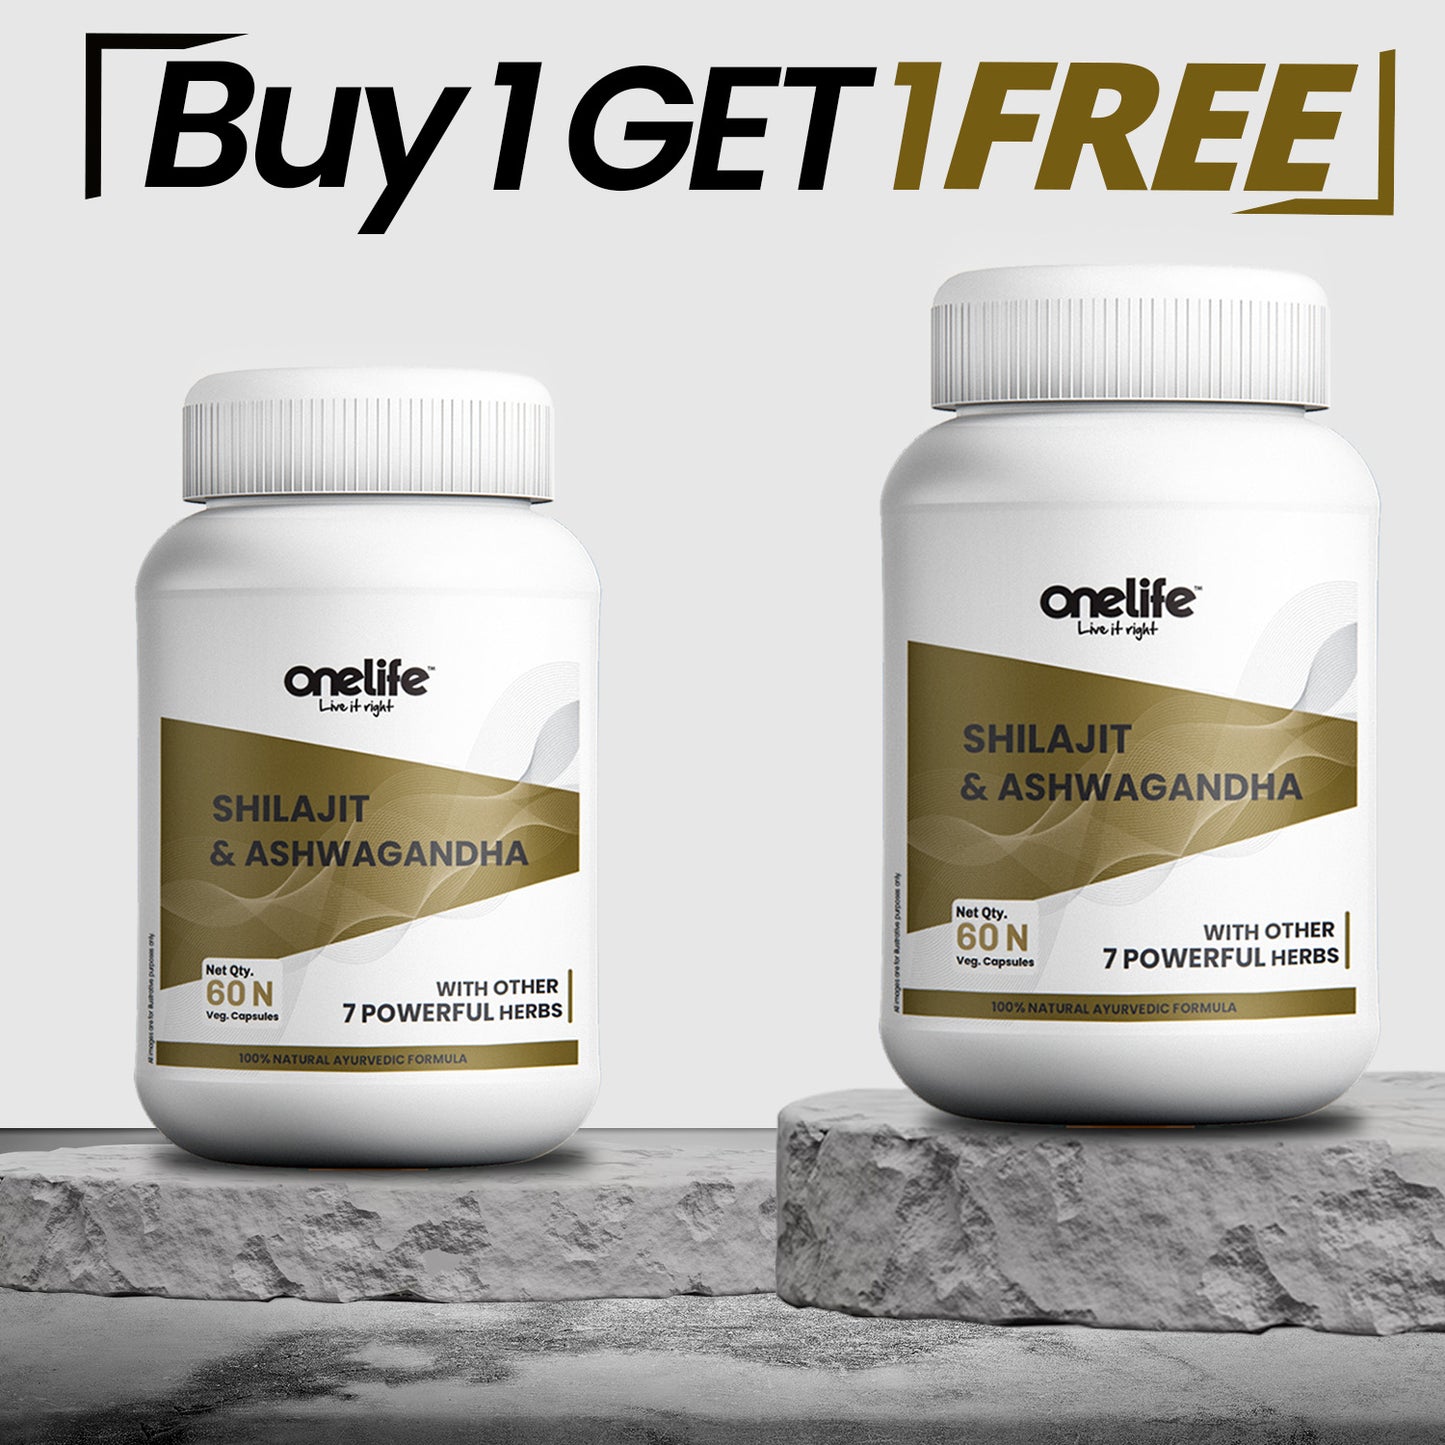 Onelife Shilajit & Ashwagandha: Ayush-approved Formulation For Performance, Strength and Stamina, 60 Capsules - Buy 1 Get 1 FREE